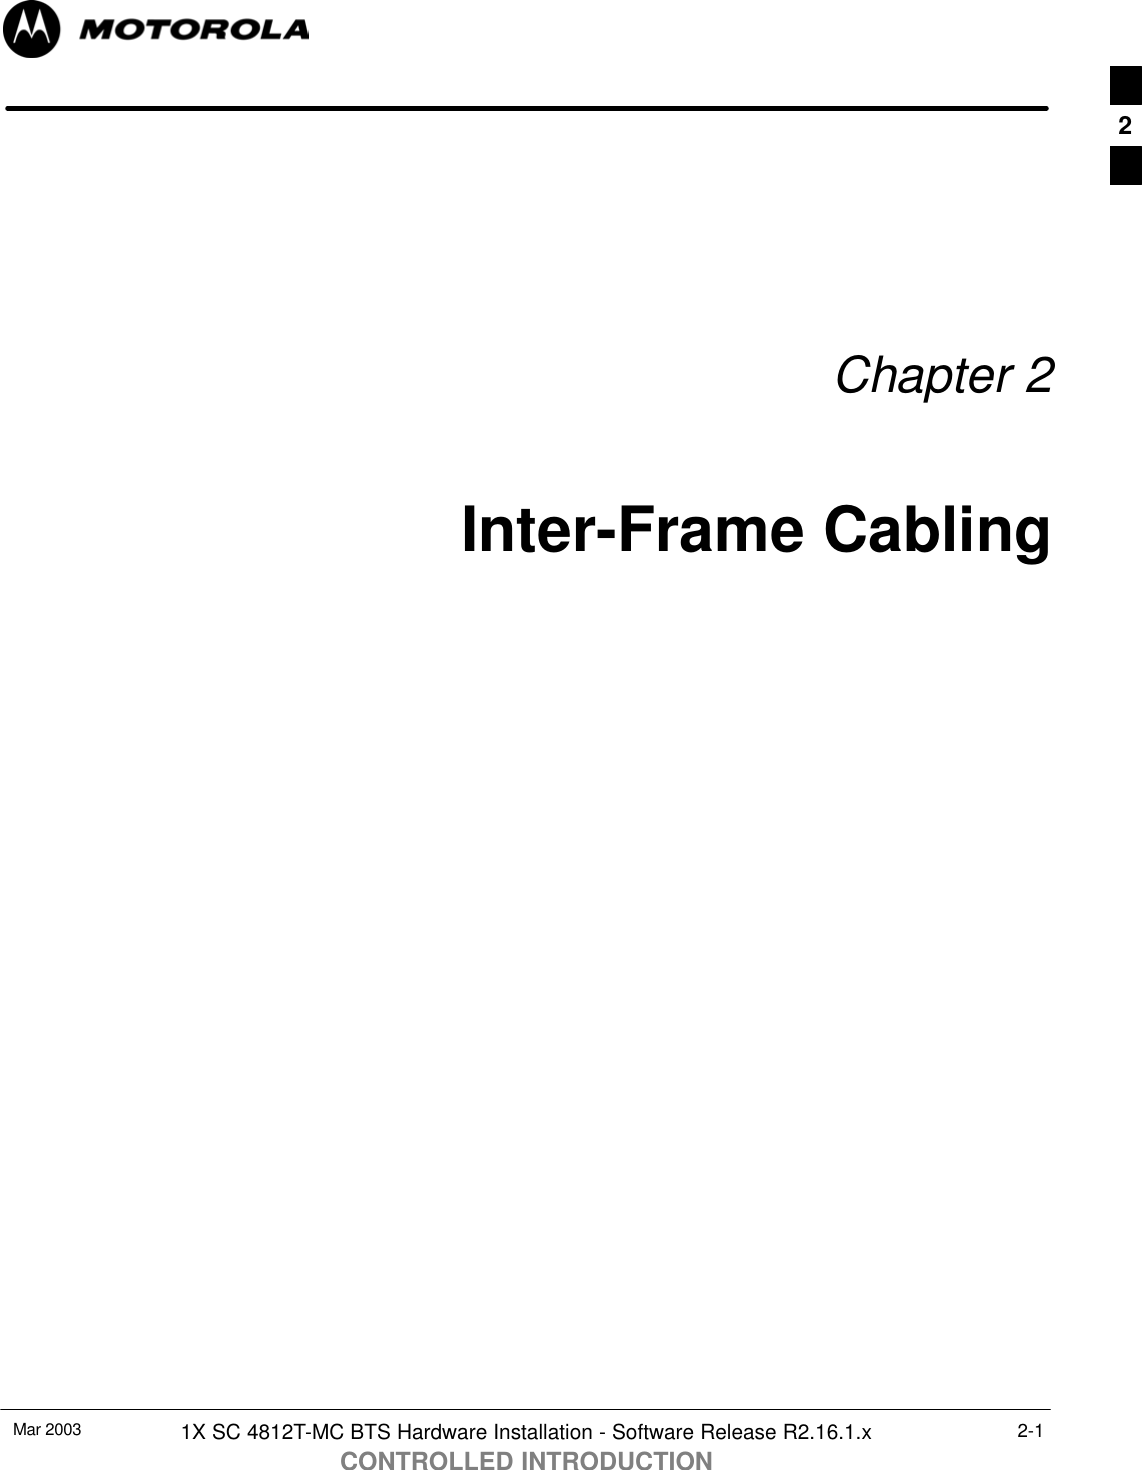 Mar 2003 1X SC 4812T-MC BTS Hardware Installation - Software Release R2.16.1.xCONTROLLED INTRODUCTION2-1Chapter 2Inter-Frame Cabling2